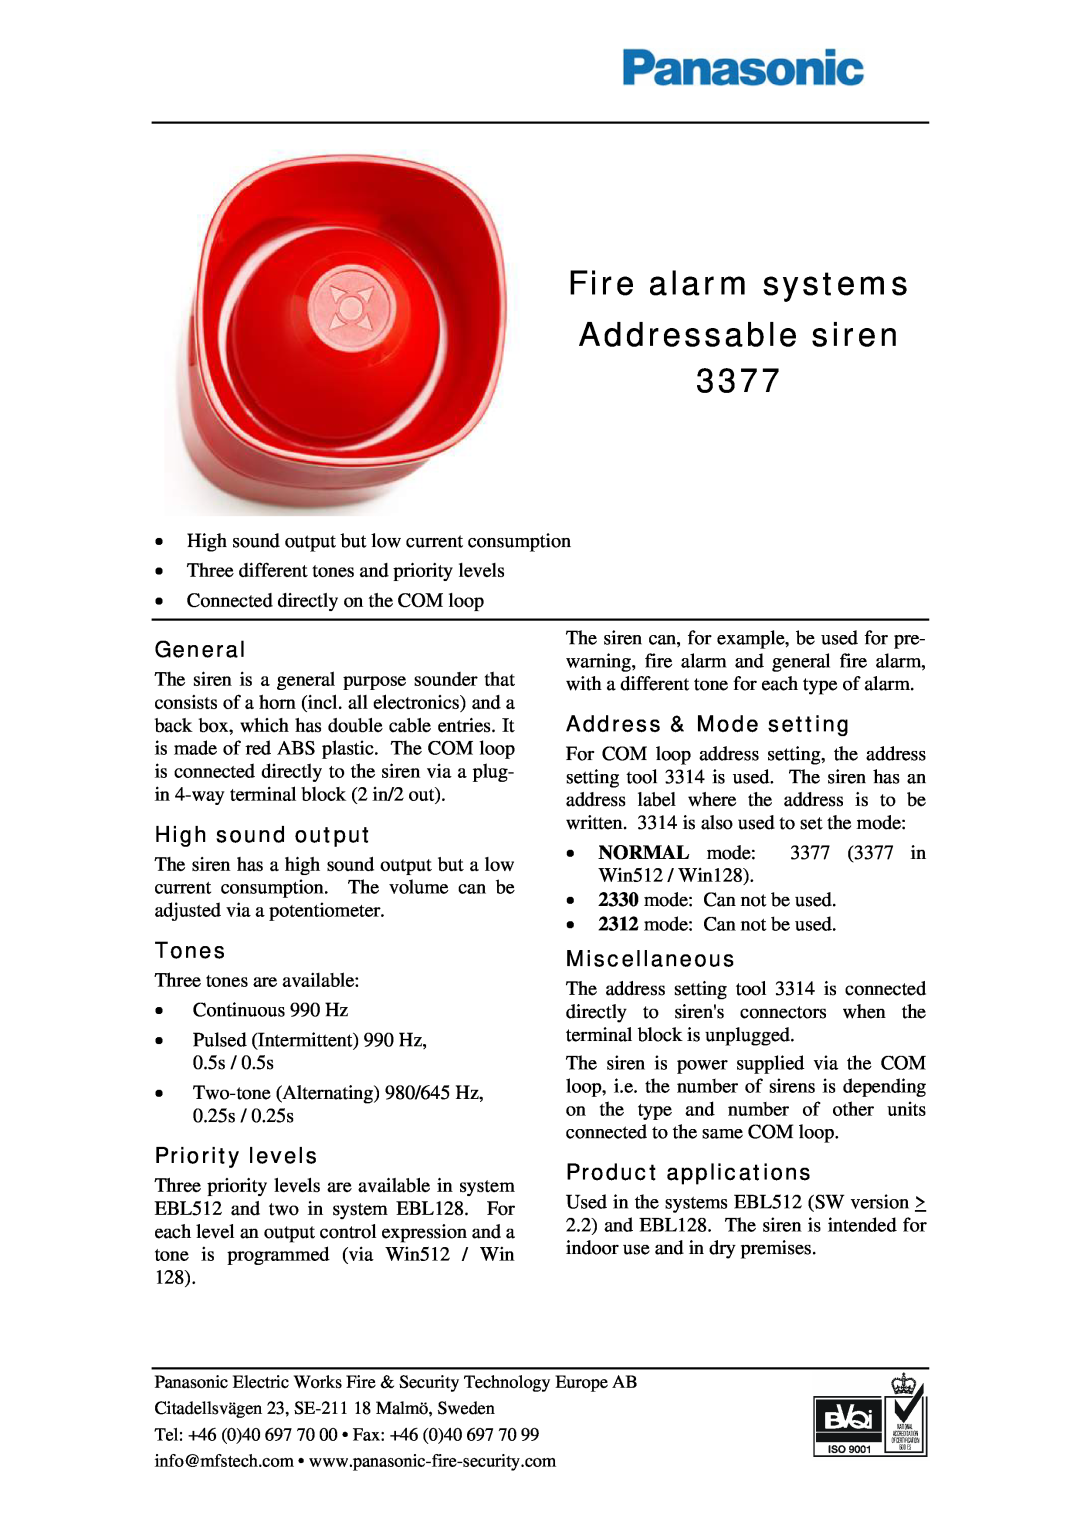 Panasonic 3377 manual Fire alarm systems Addressable siren, General, High sound output, Tones, Priority levels 